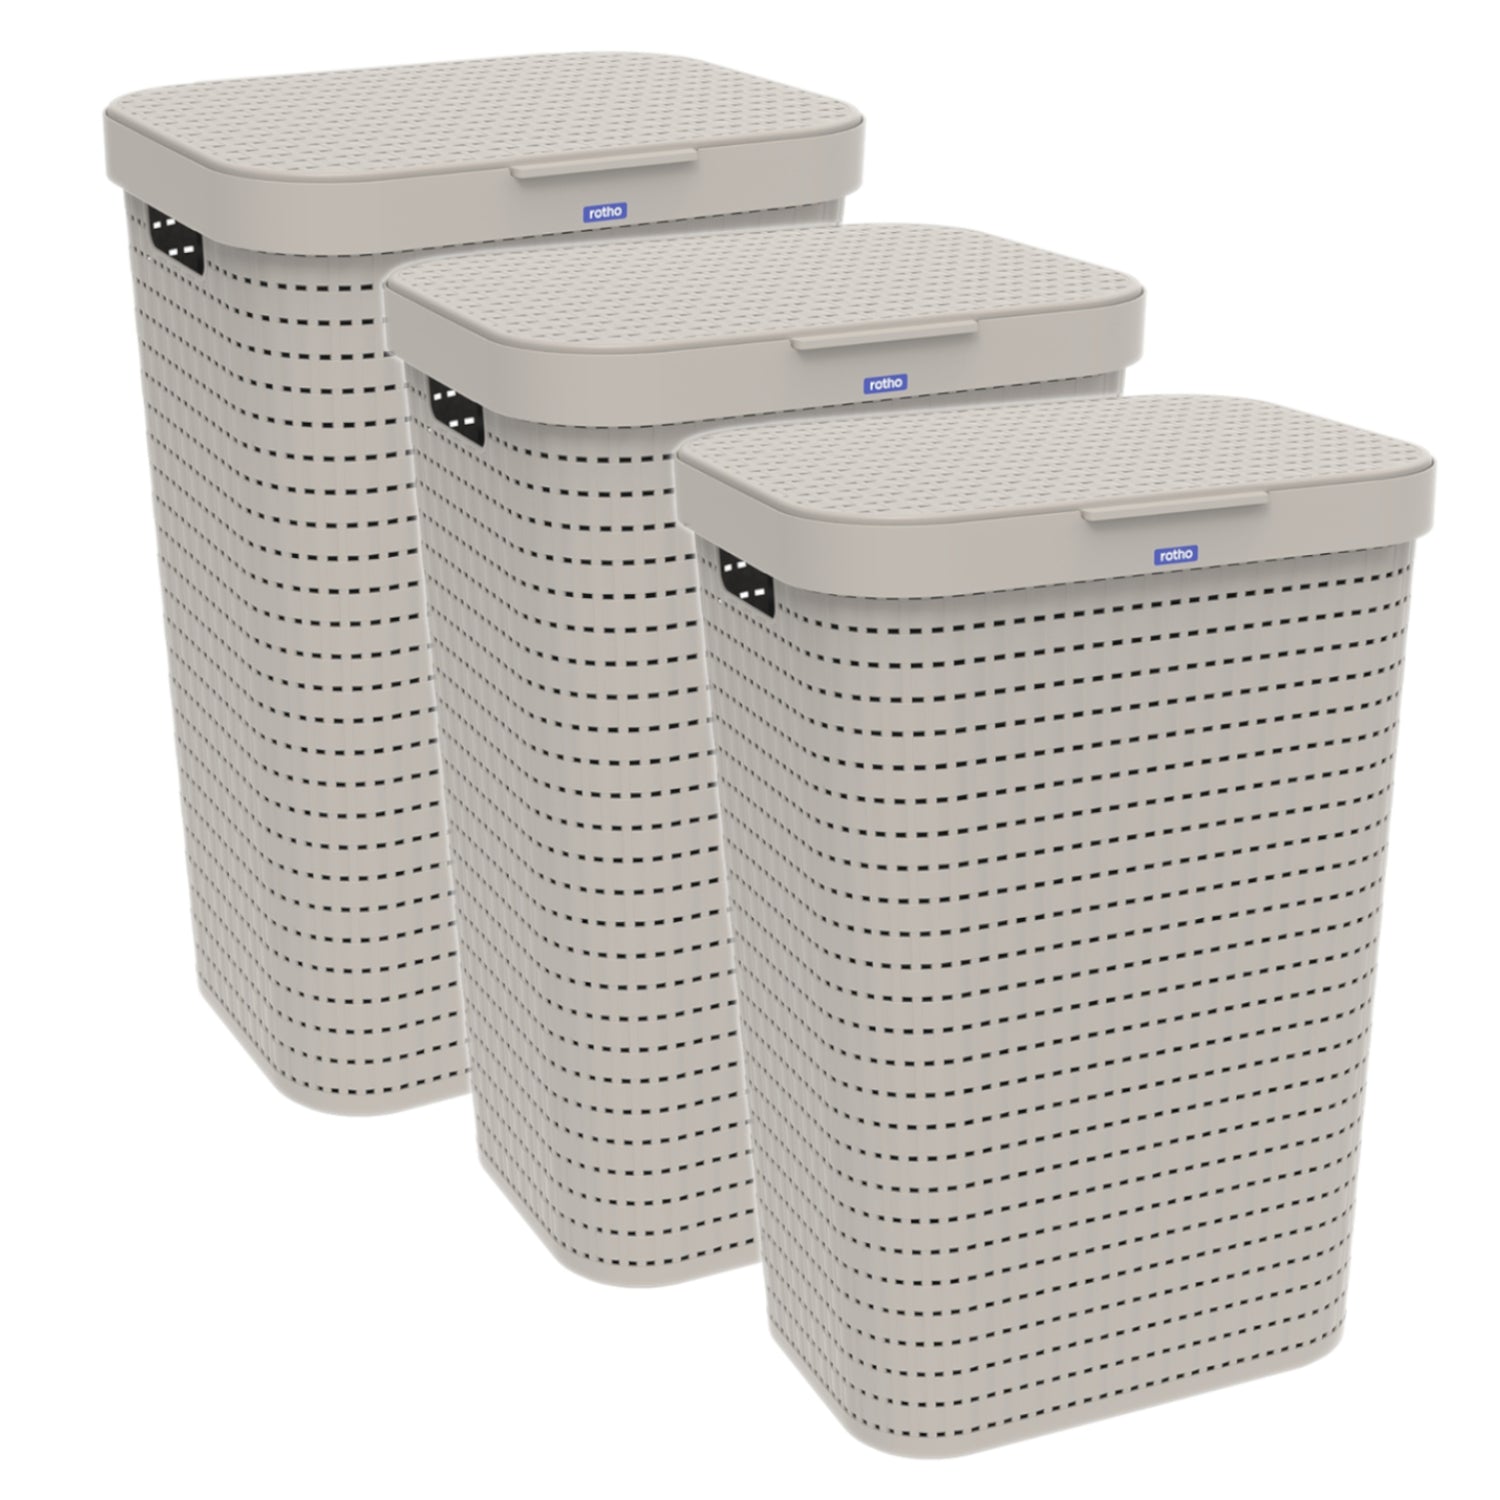 Laundy Basket 3pc Set with Lid 55L l COUNTRY